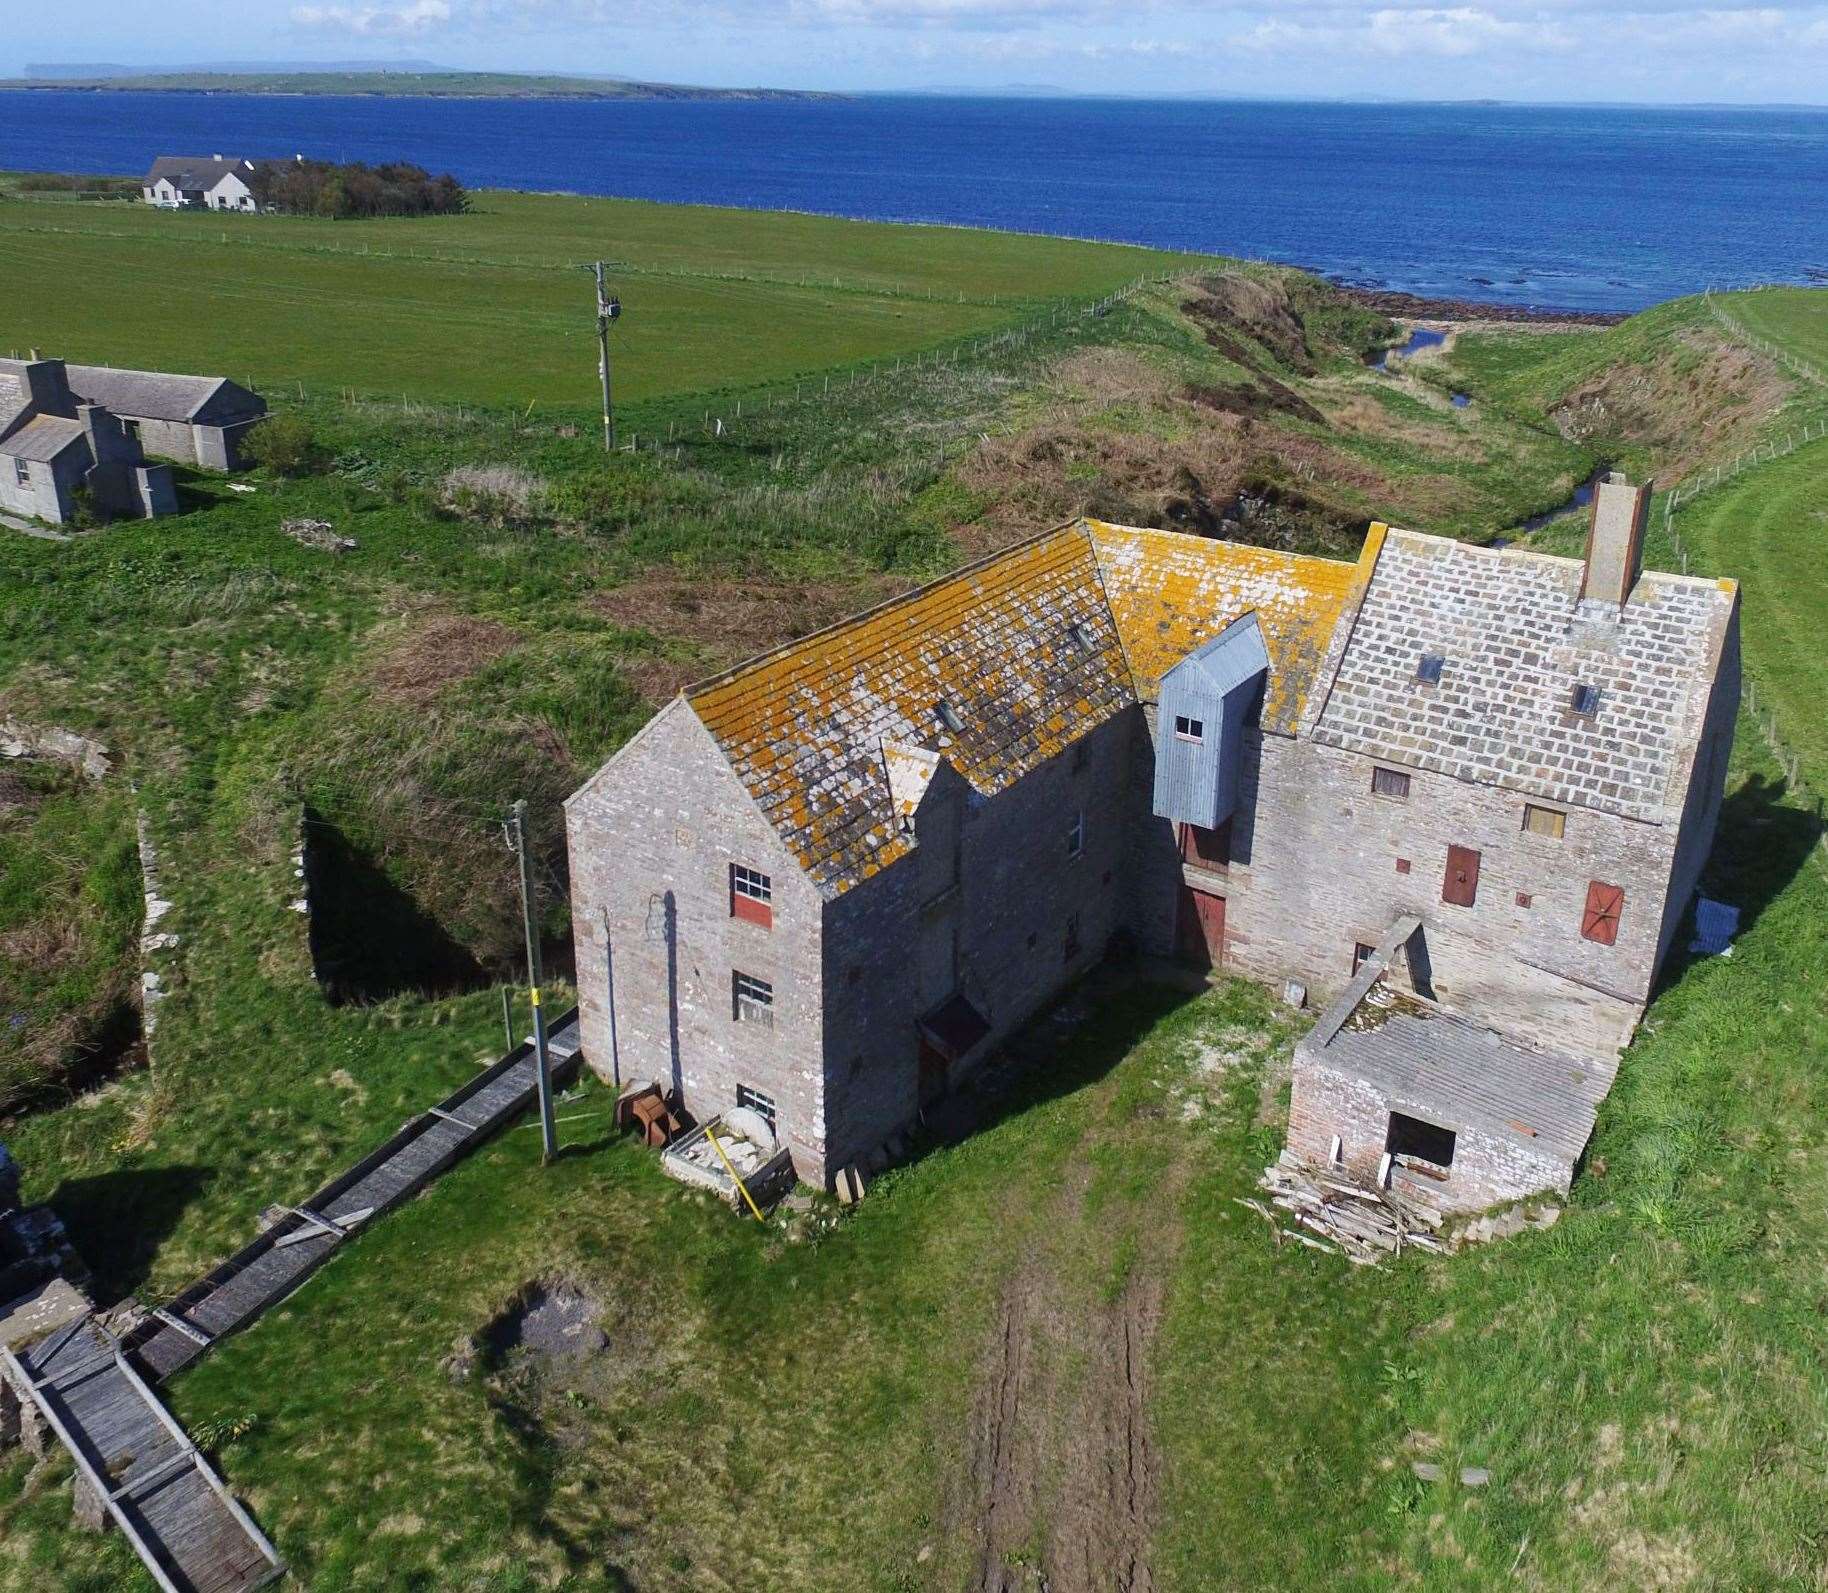 The event takes place at the John O'Groats Mill site.